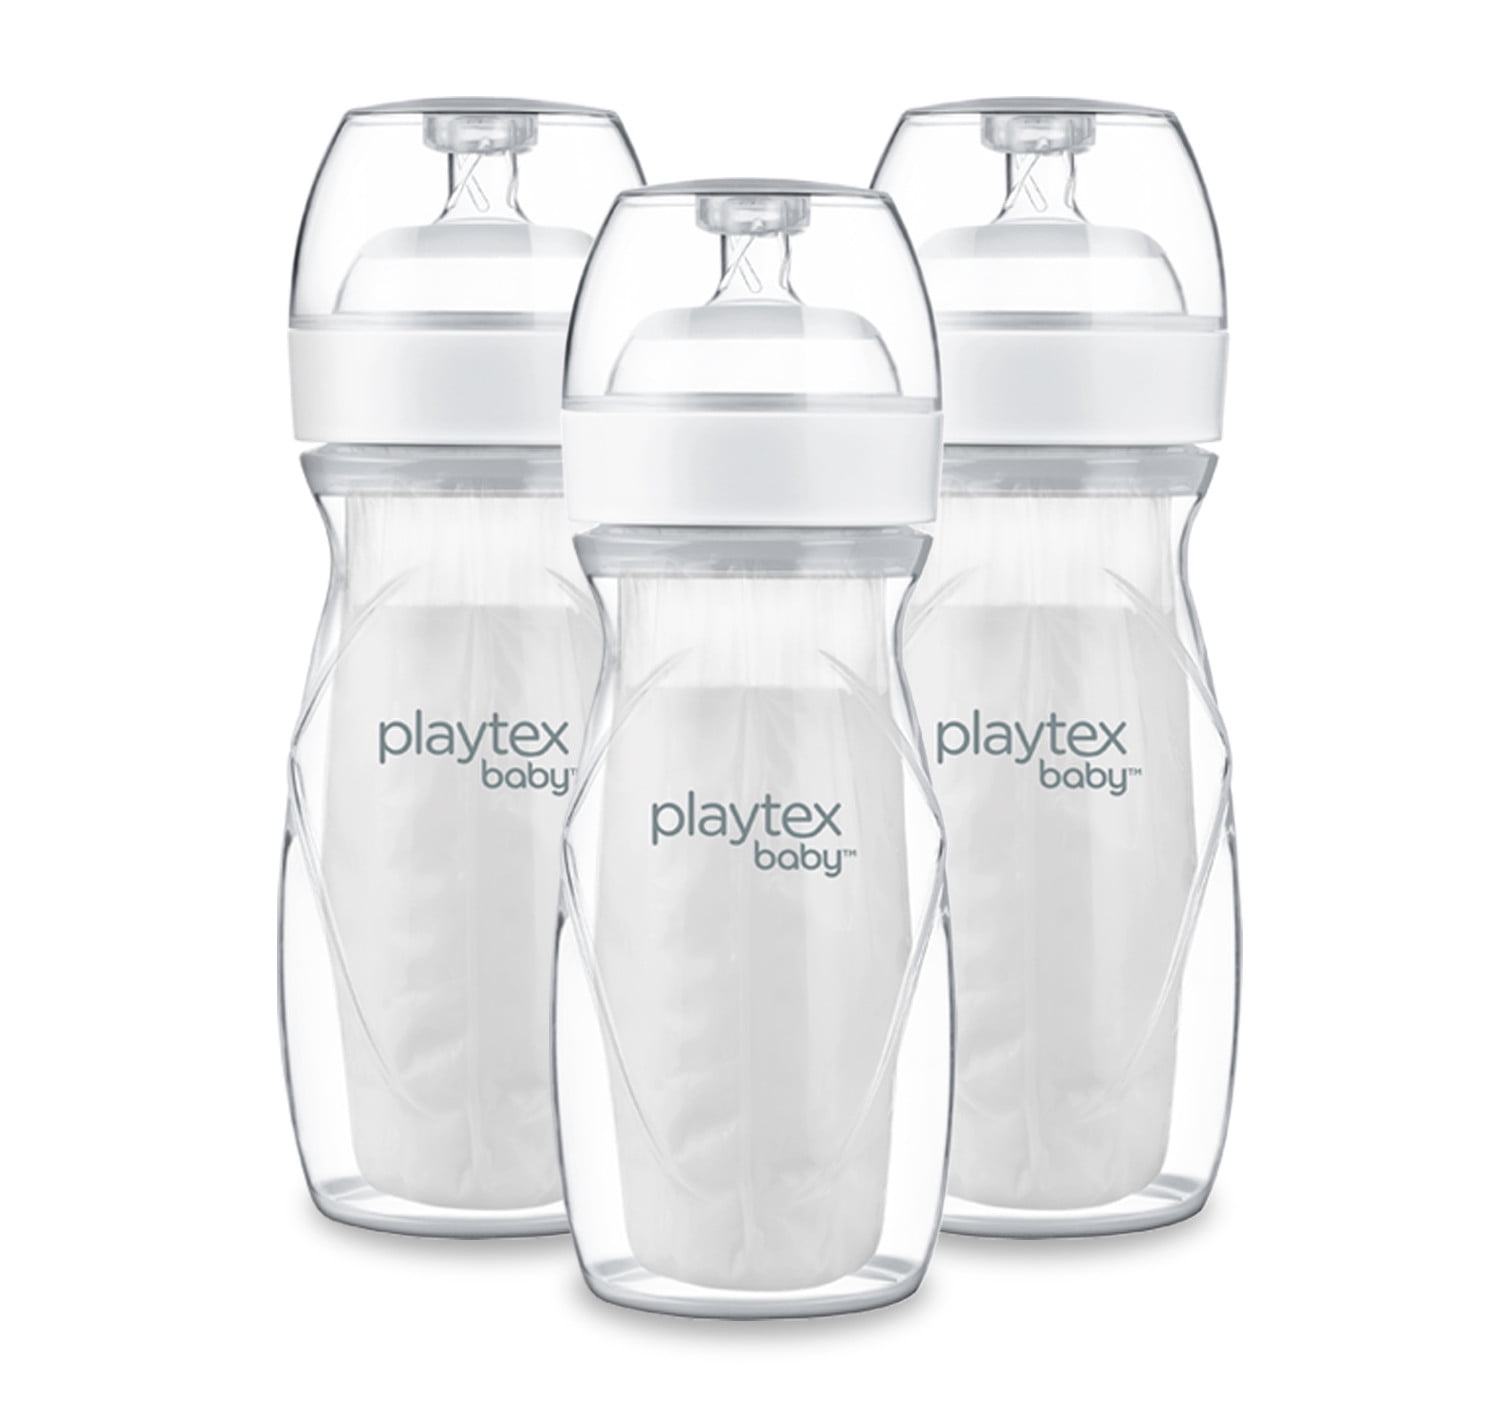 Playtex Baby Nurser Bottle With Drop-Ins Liners 8oz Choose Quantity Disposable